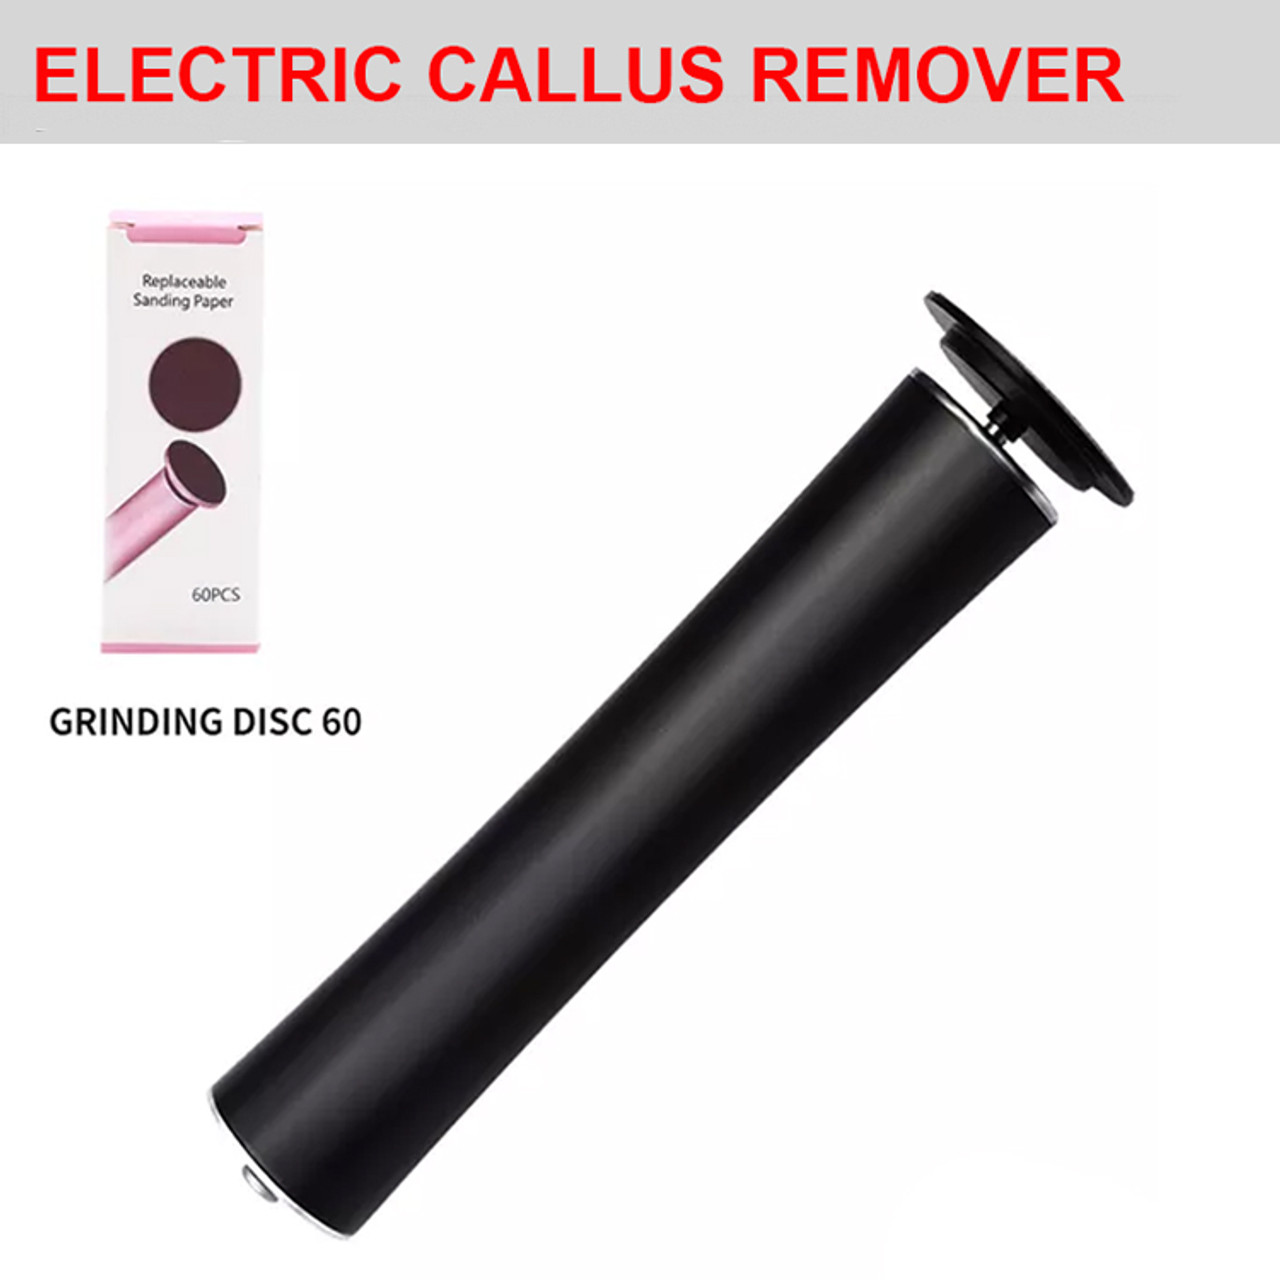 https://cdn11.bigcommerce.com/s-e4af5/images/stencil/1280x1280/products/47648/132928/TL-DS02_Electric_Foot_Callus_Remover_4__42998.1645776804.jpg?c=2?imbypass=on